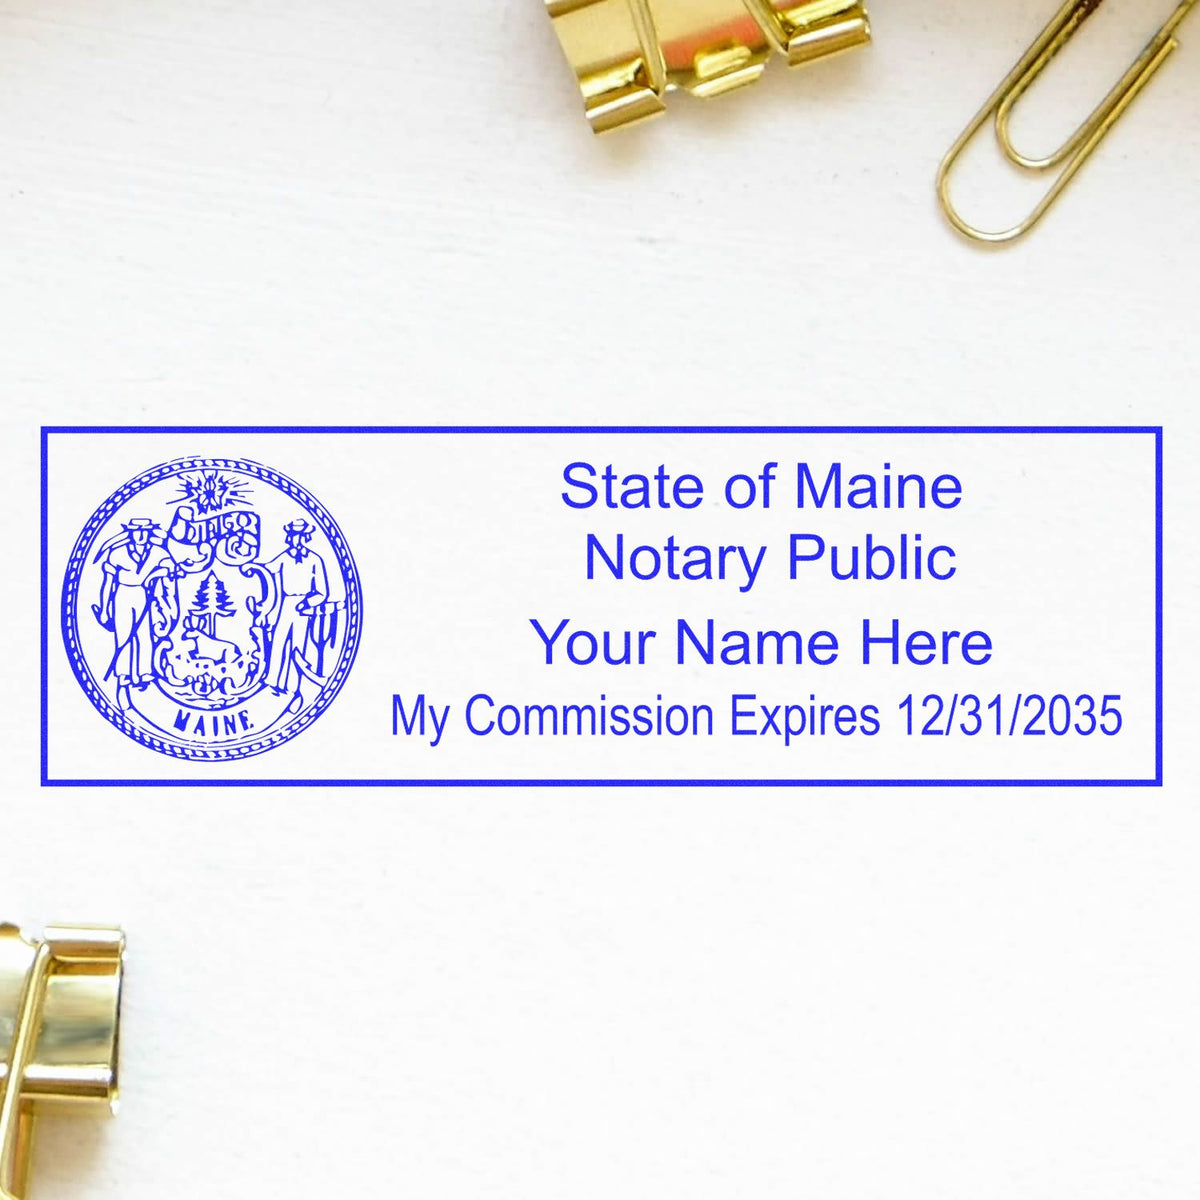 An alternative view of the Super Slim Maine Notary Public Stamp stamped on a sheet of paper showing the image in use